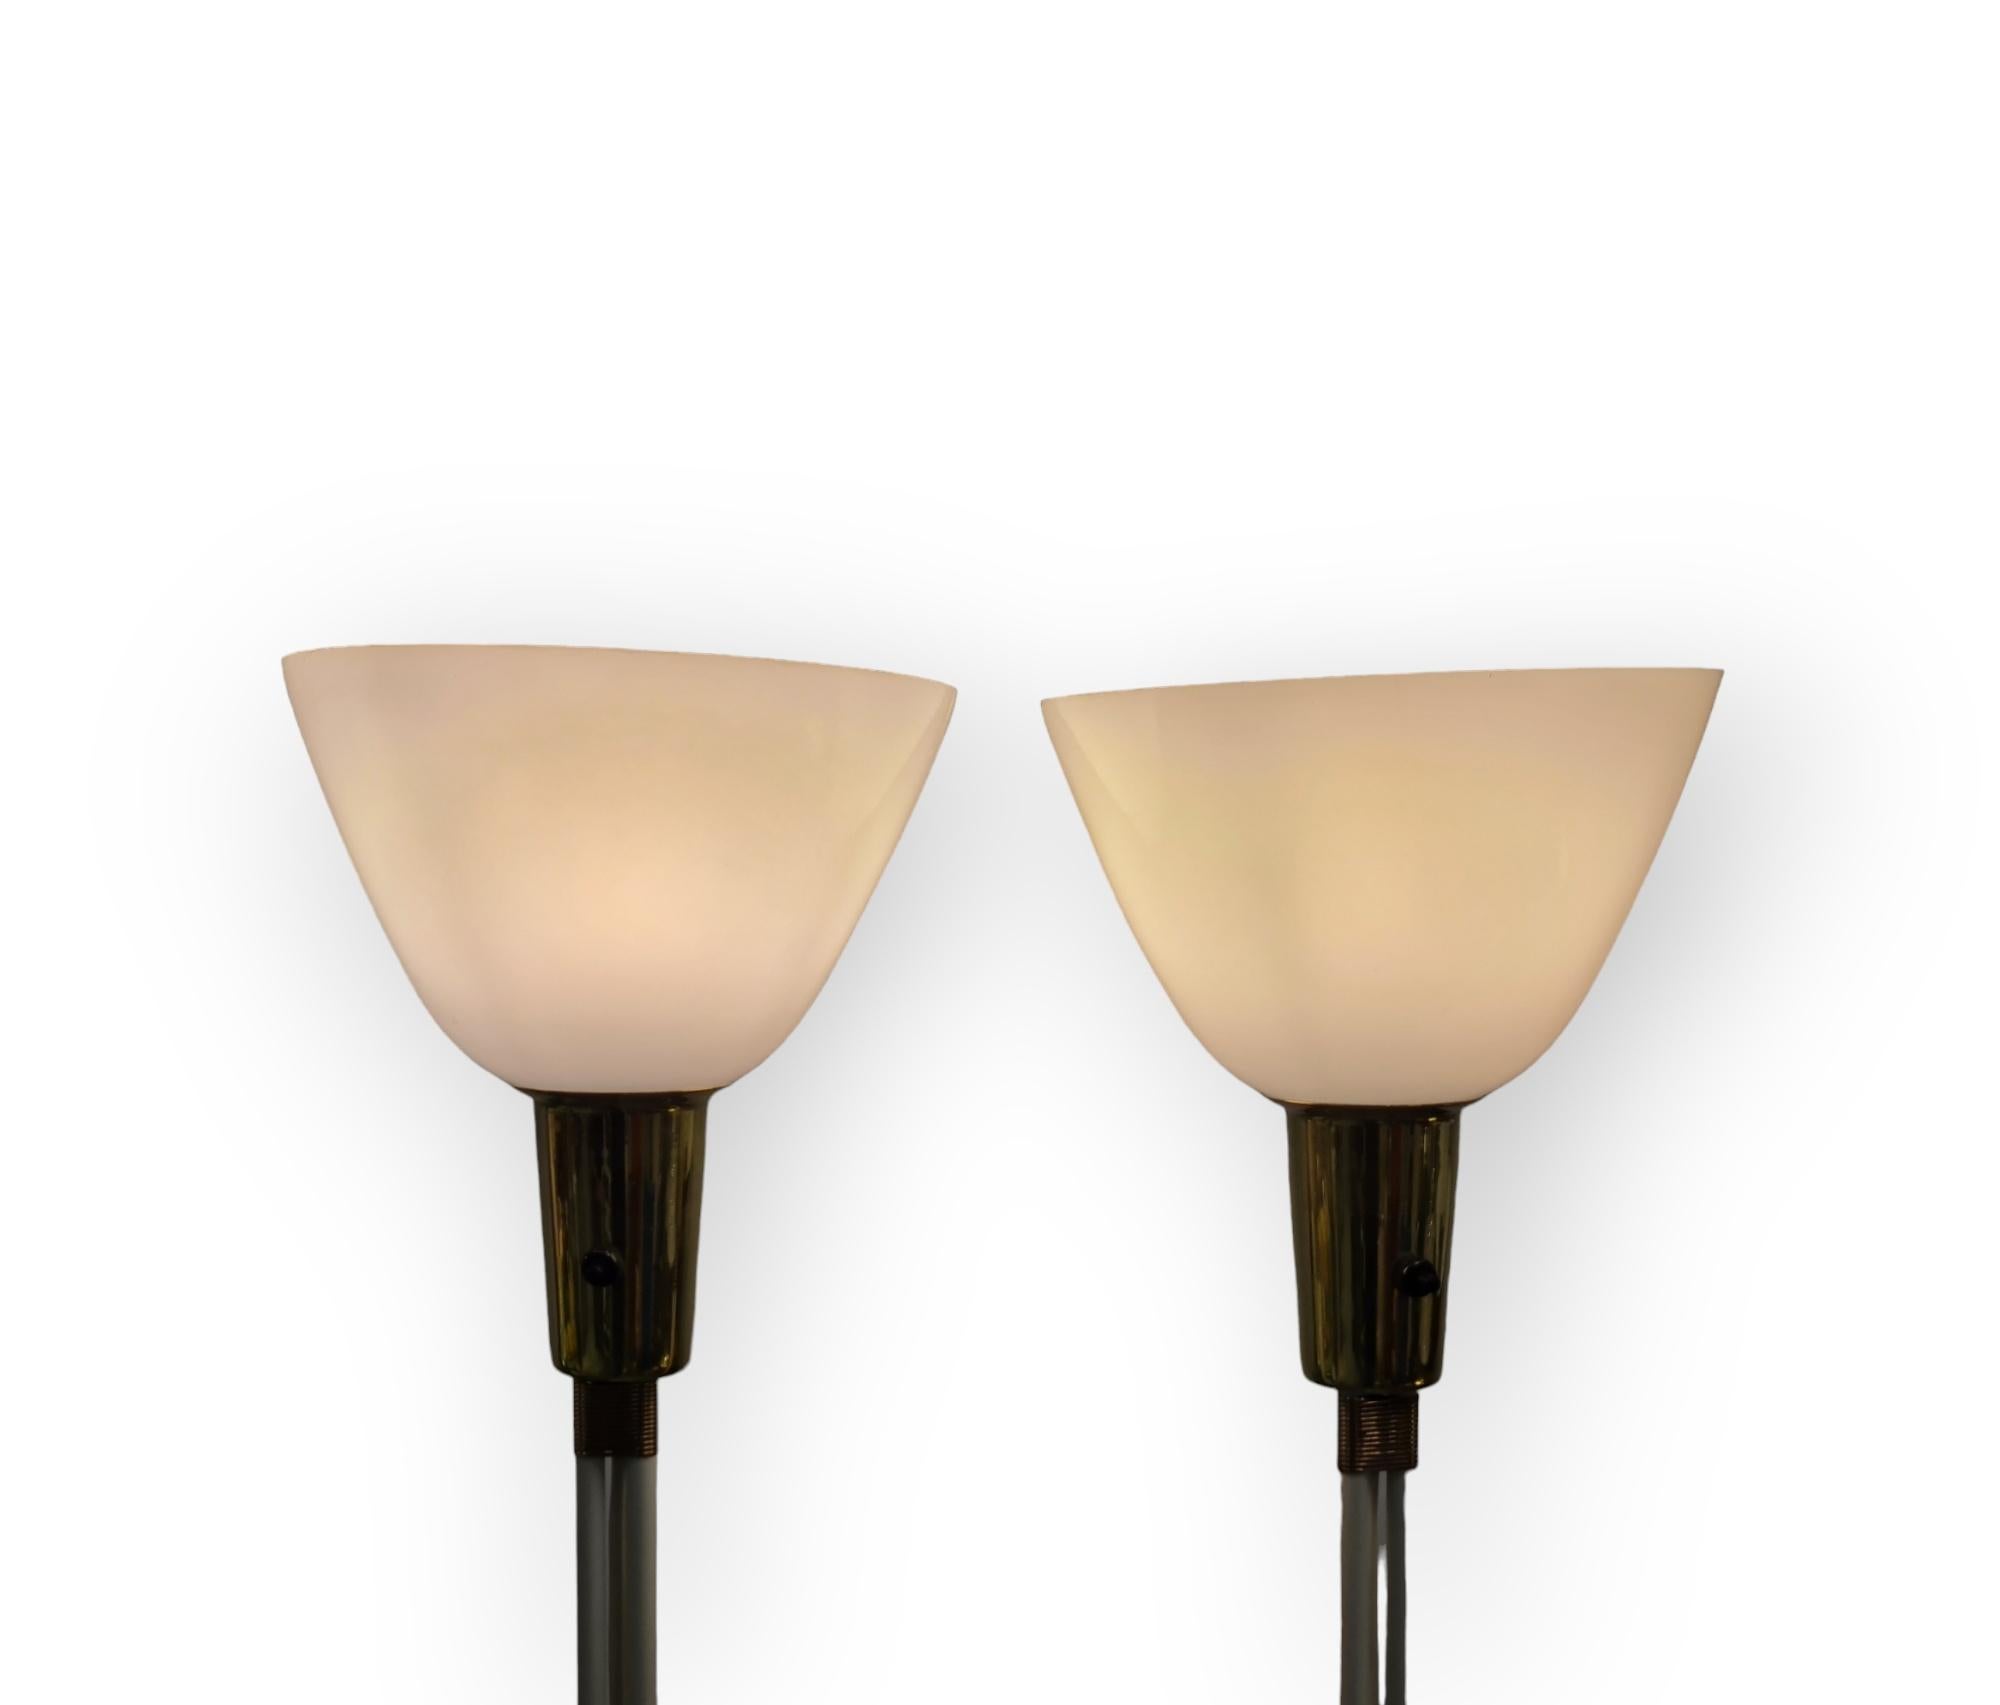 Pair of Lisa Johansson-Papé floor lamps for Orno, model 30-058, 1950s 3